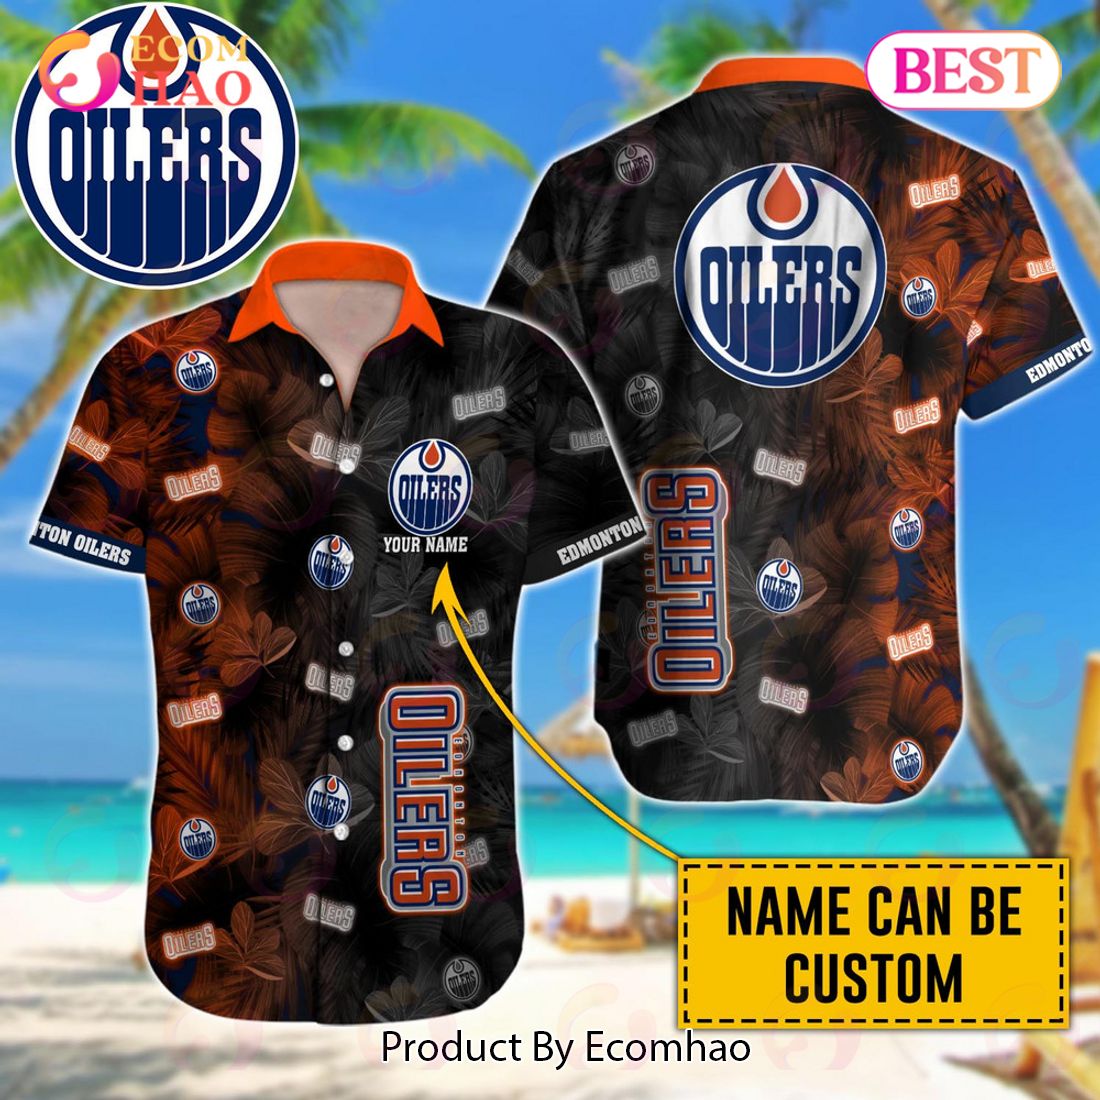 NHL Edmonton Oilers Specialized Unisex Kits With Retro Concepts